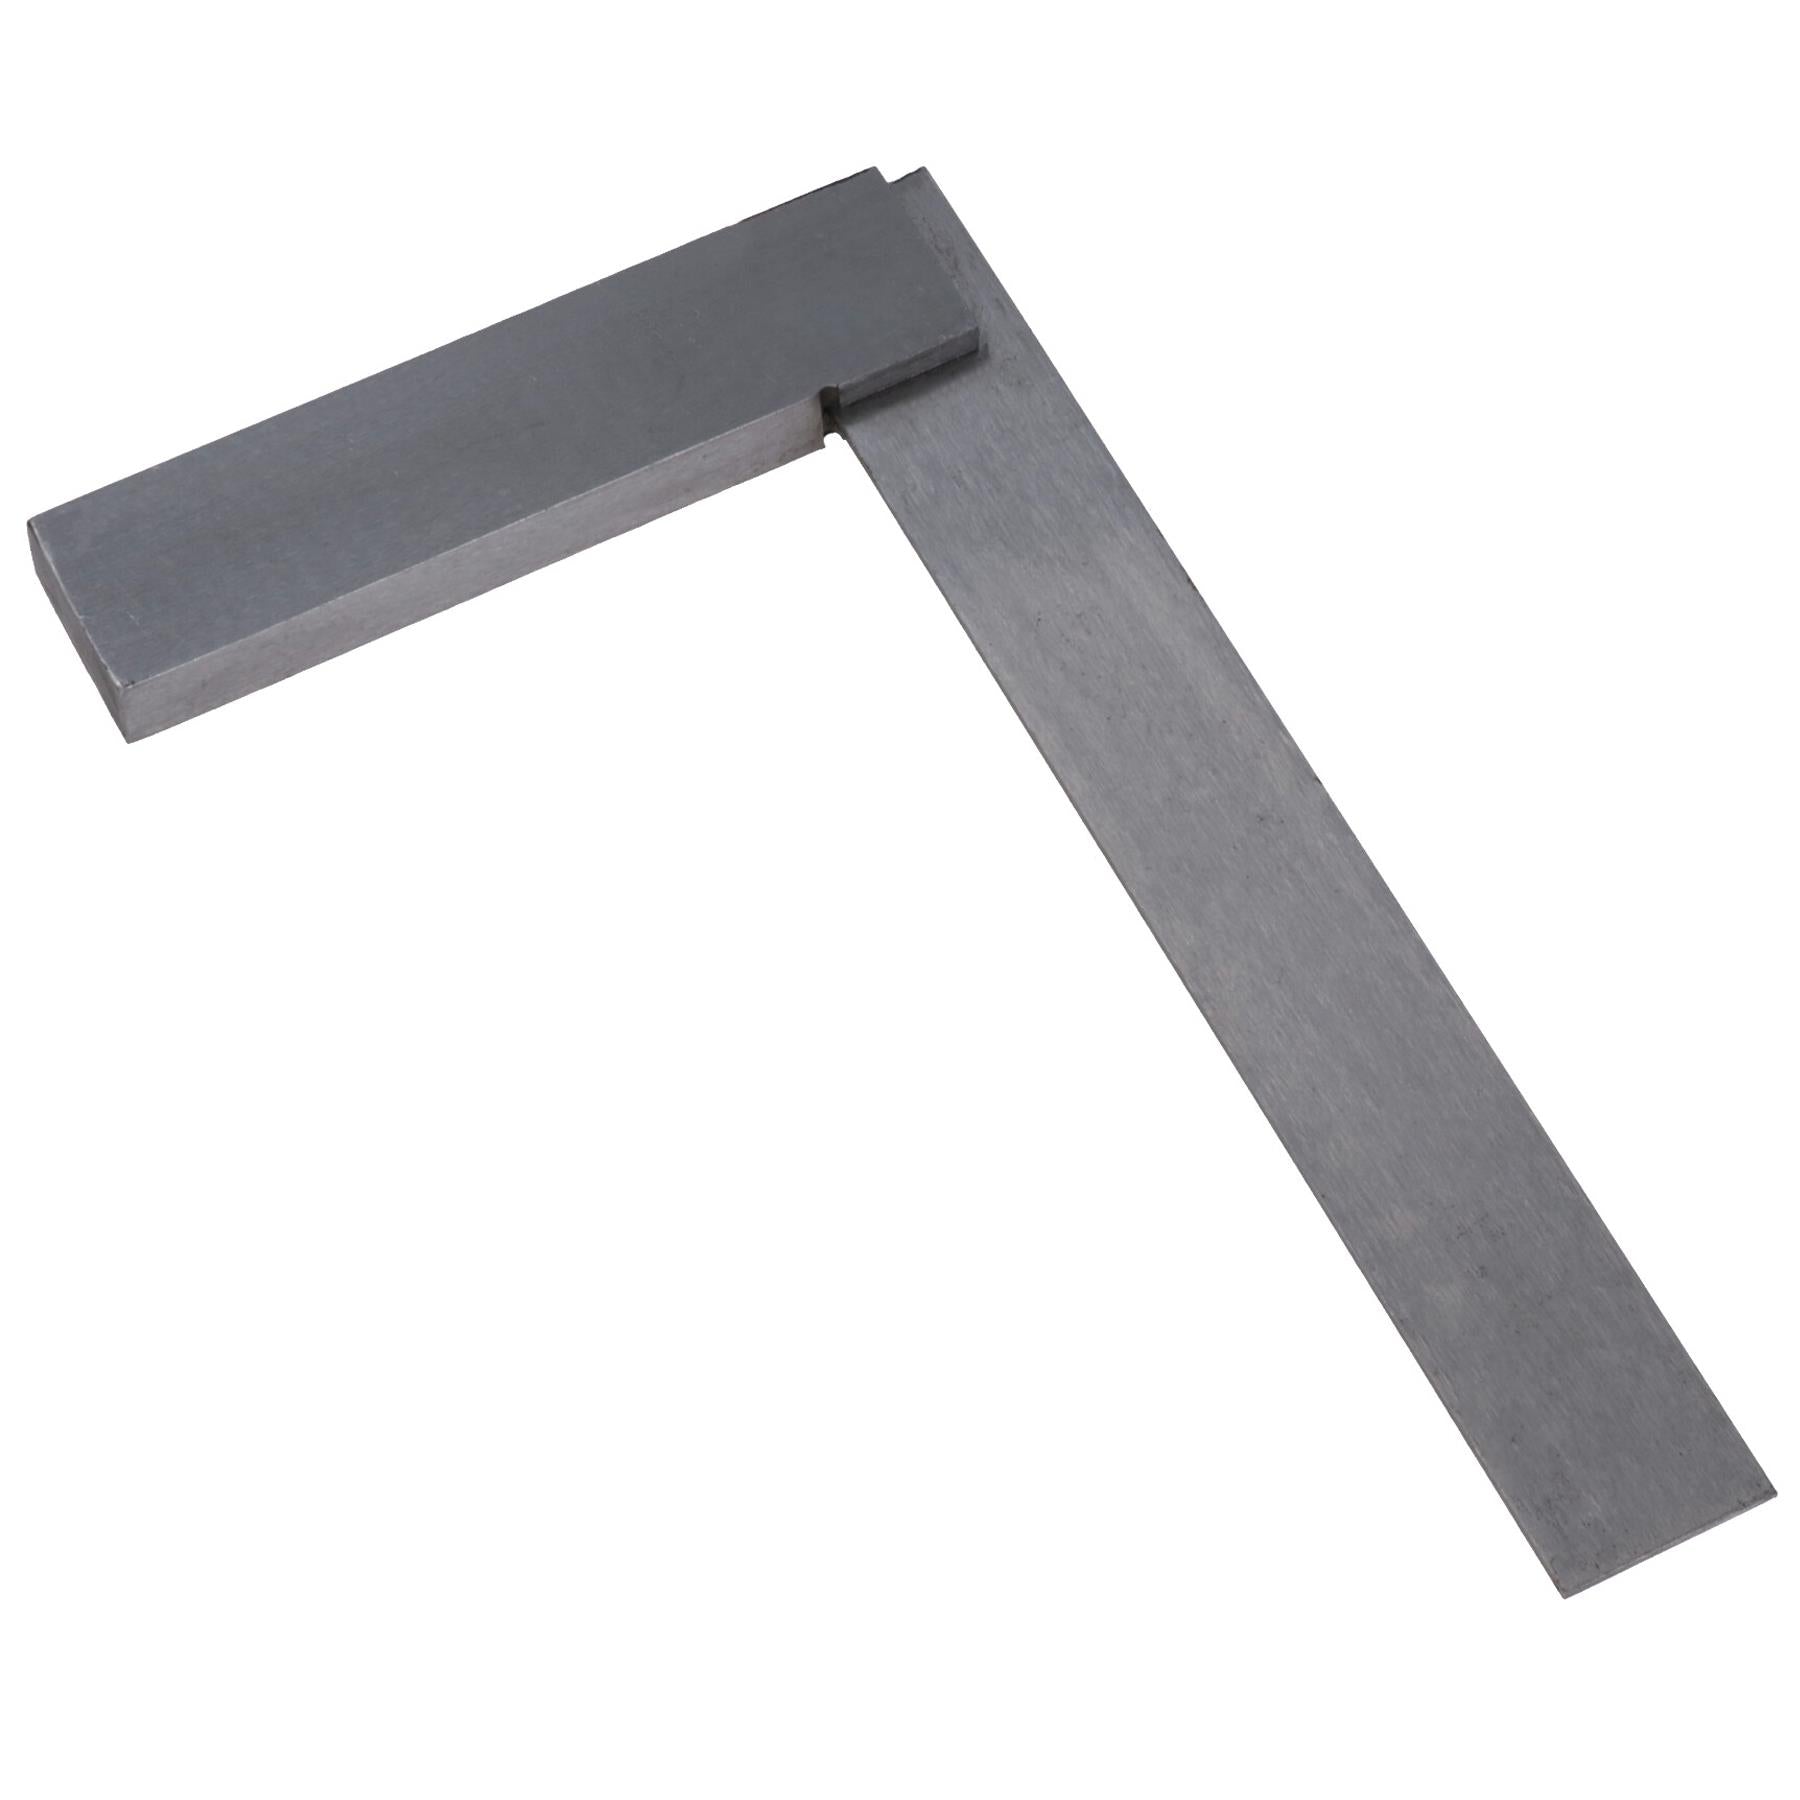 Engineers Tri Set Square Right Angle Straight Edge Stainless Steel 3” – 12”